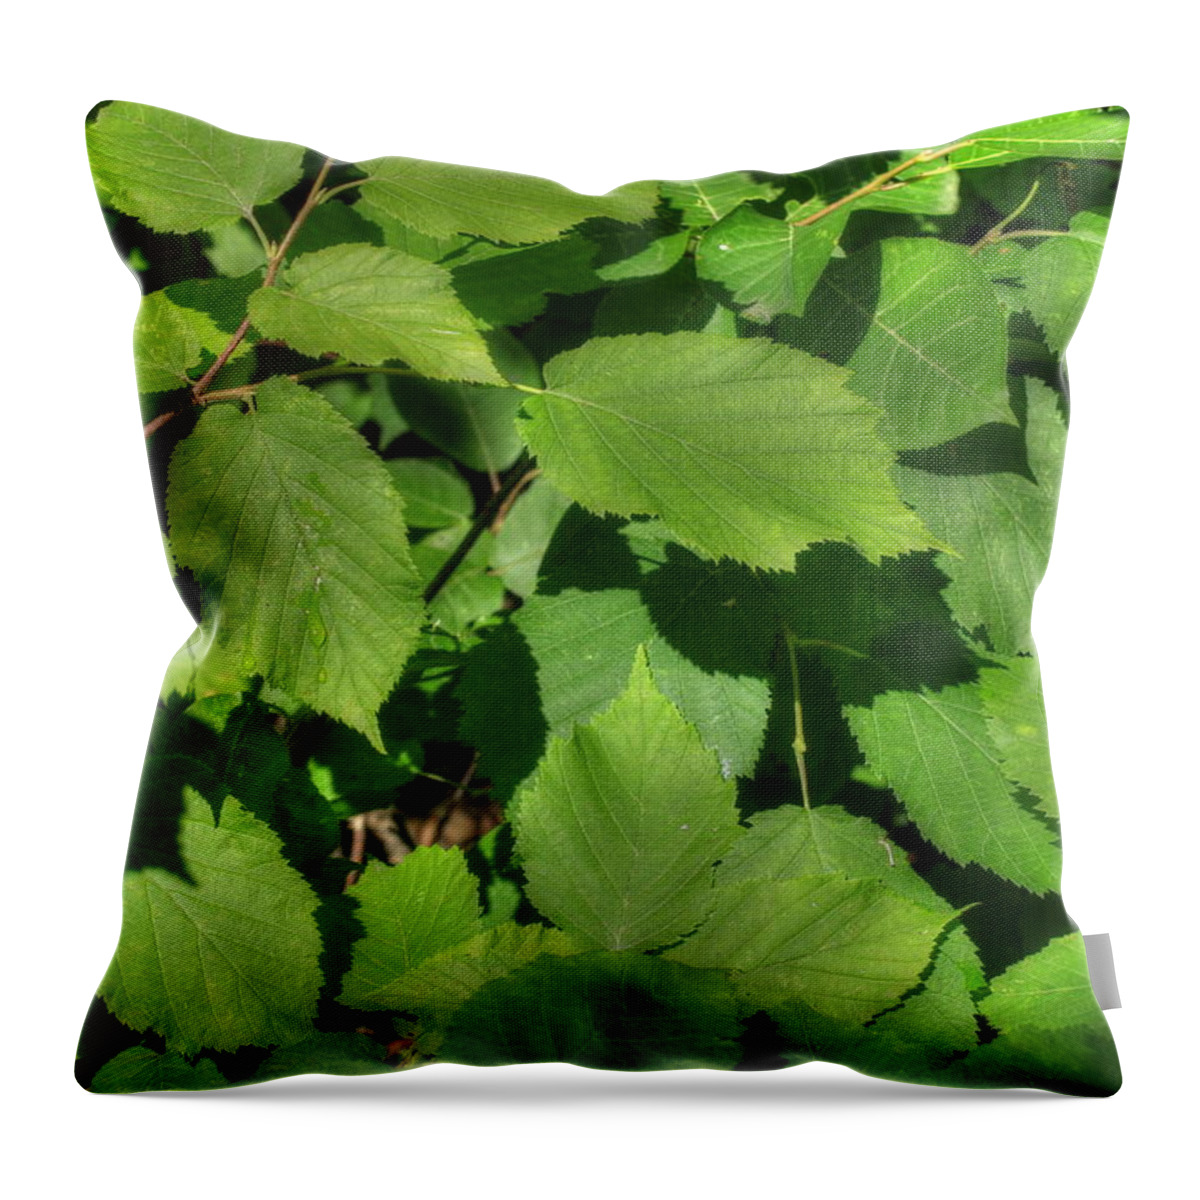 Leaves Throw Pillow featuring the photograph Green Summer Leaves by Jim Sauchyn